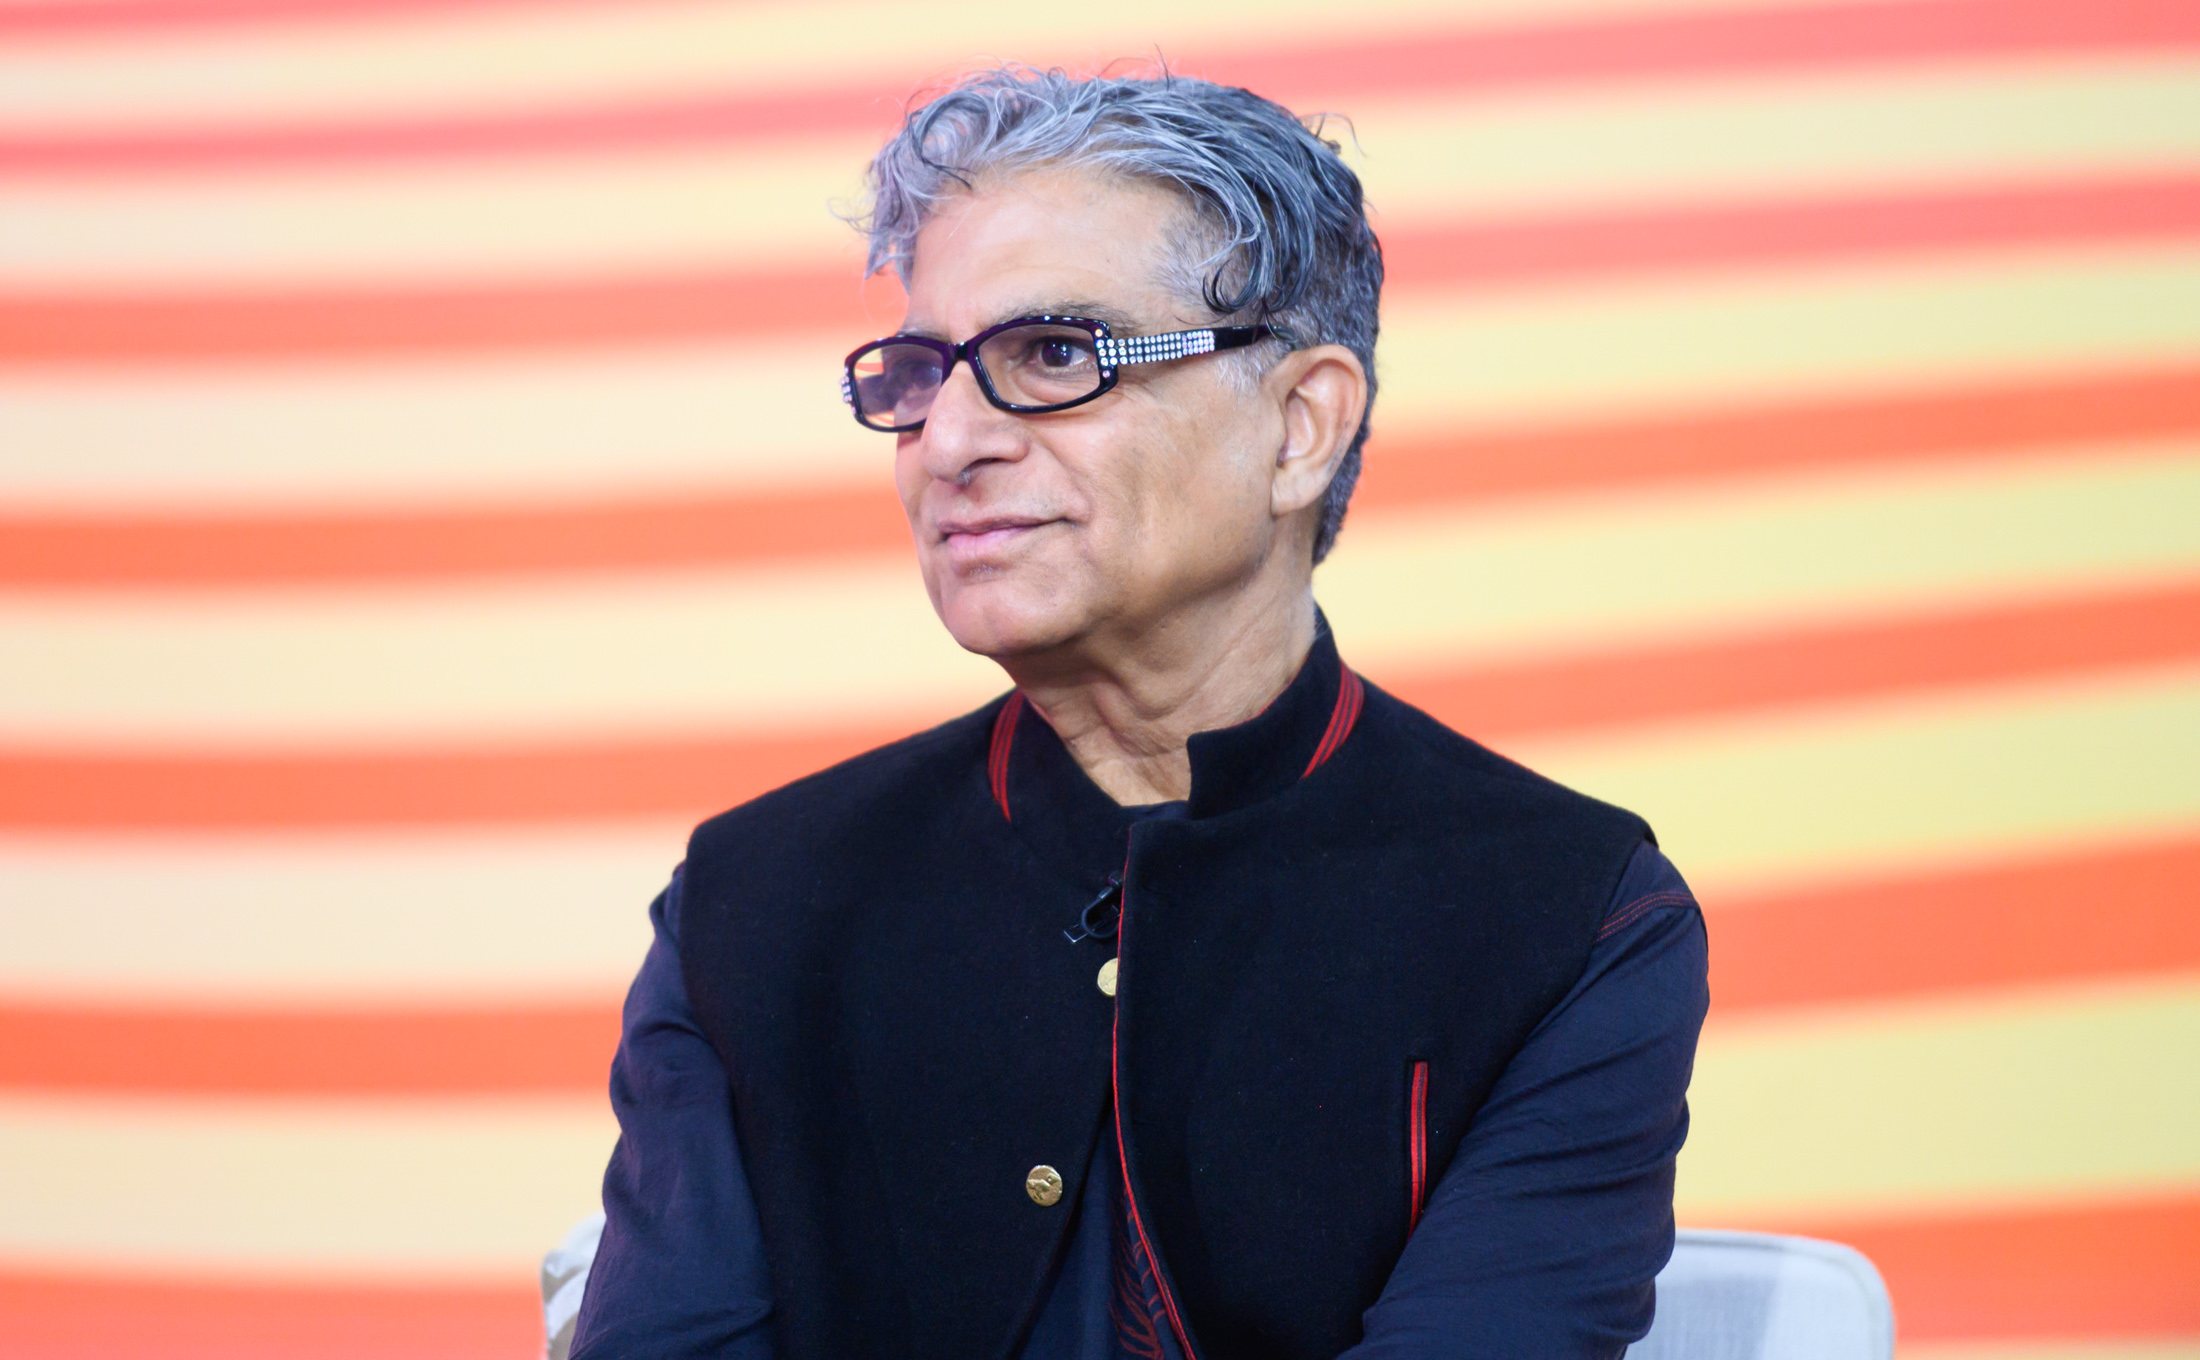 Deepak Chopra Predicts The Future of Wellness Travel After Covid - Bloomberg